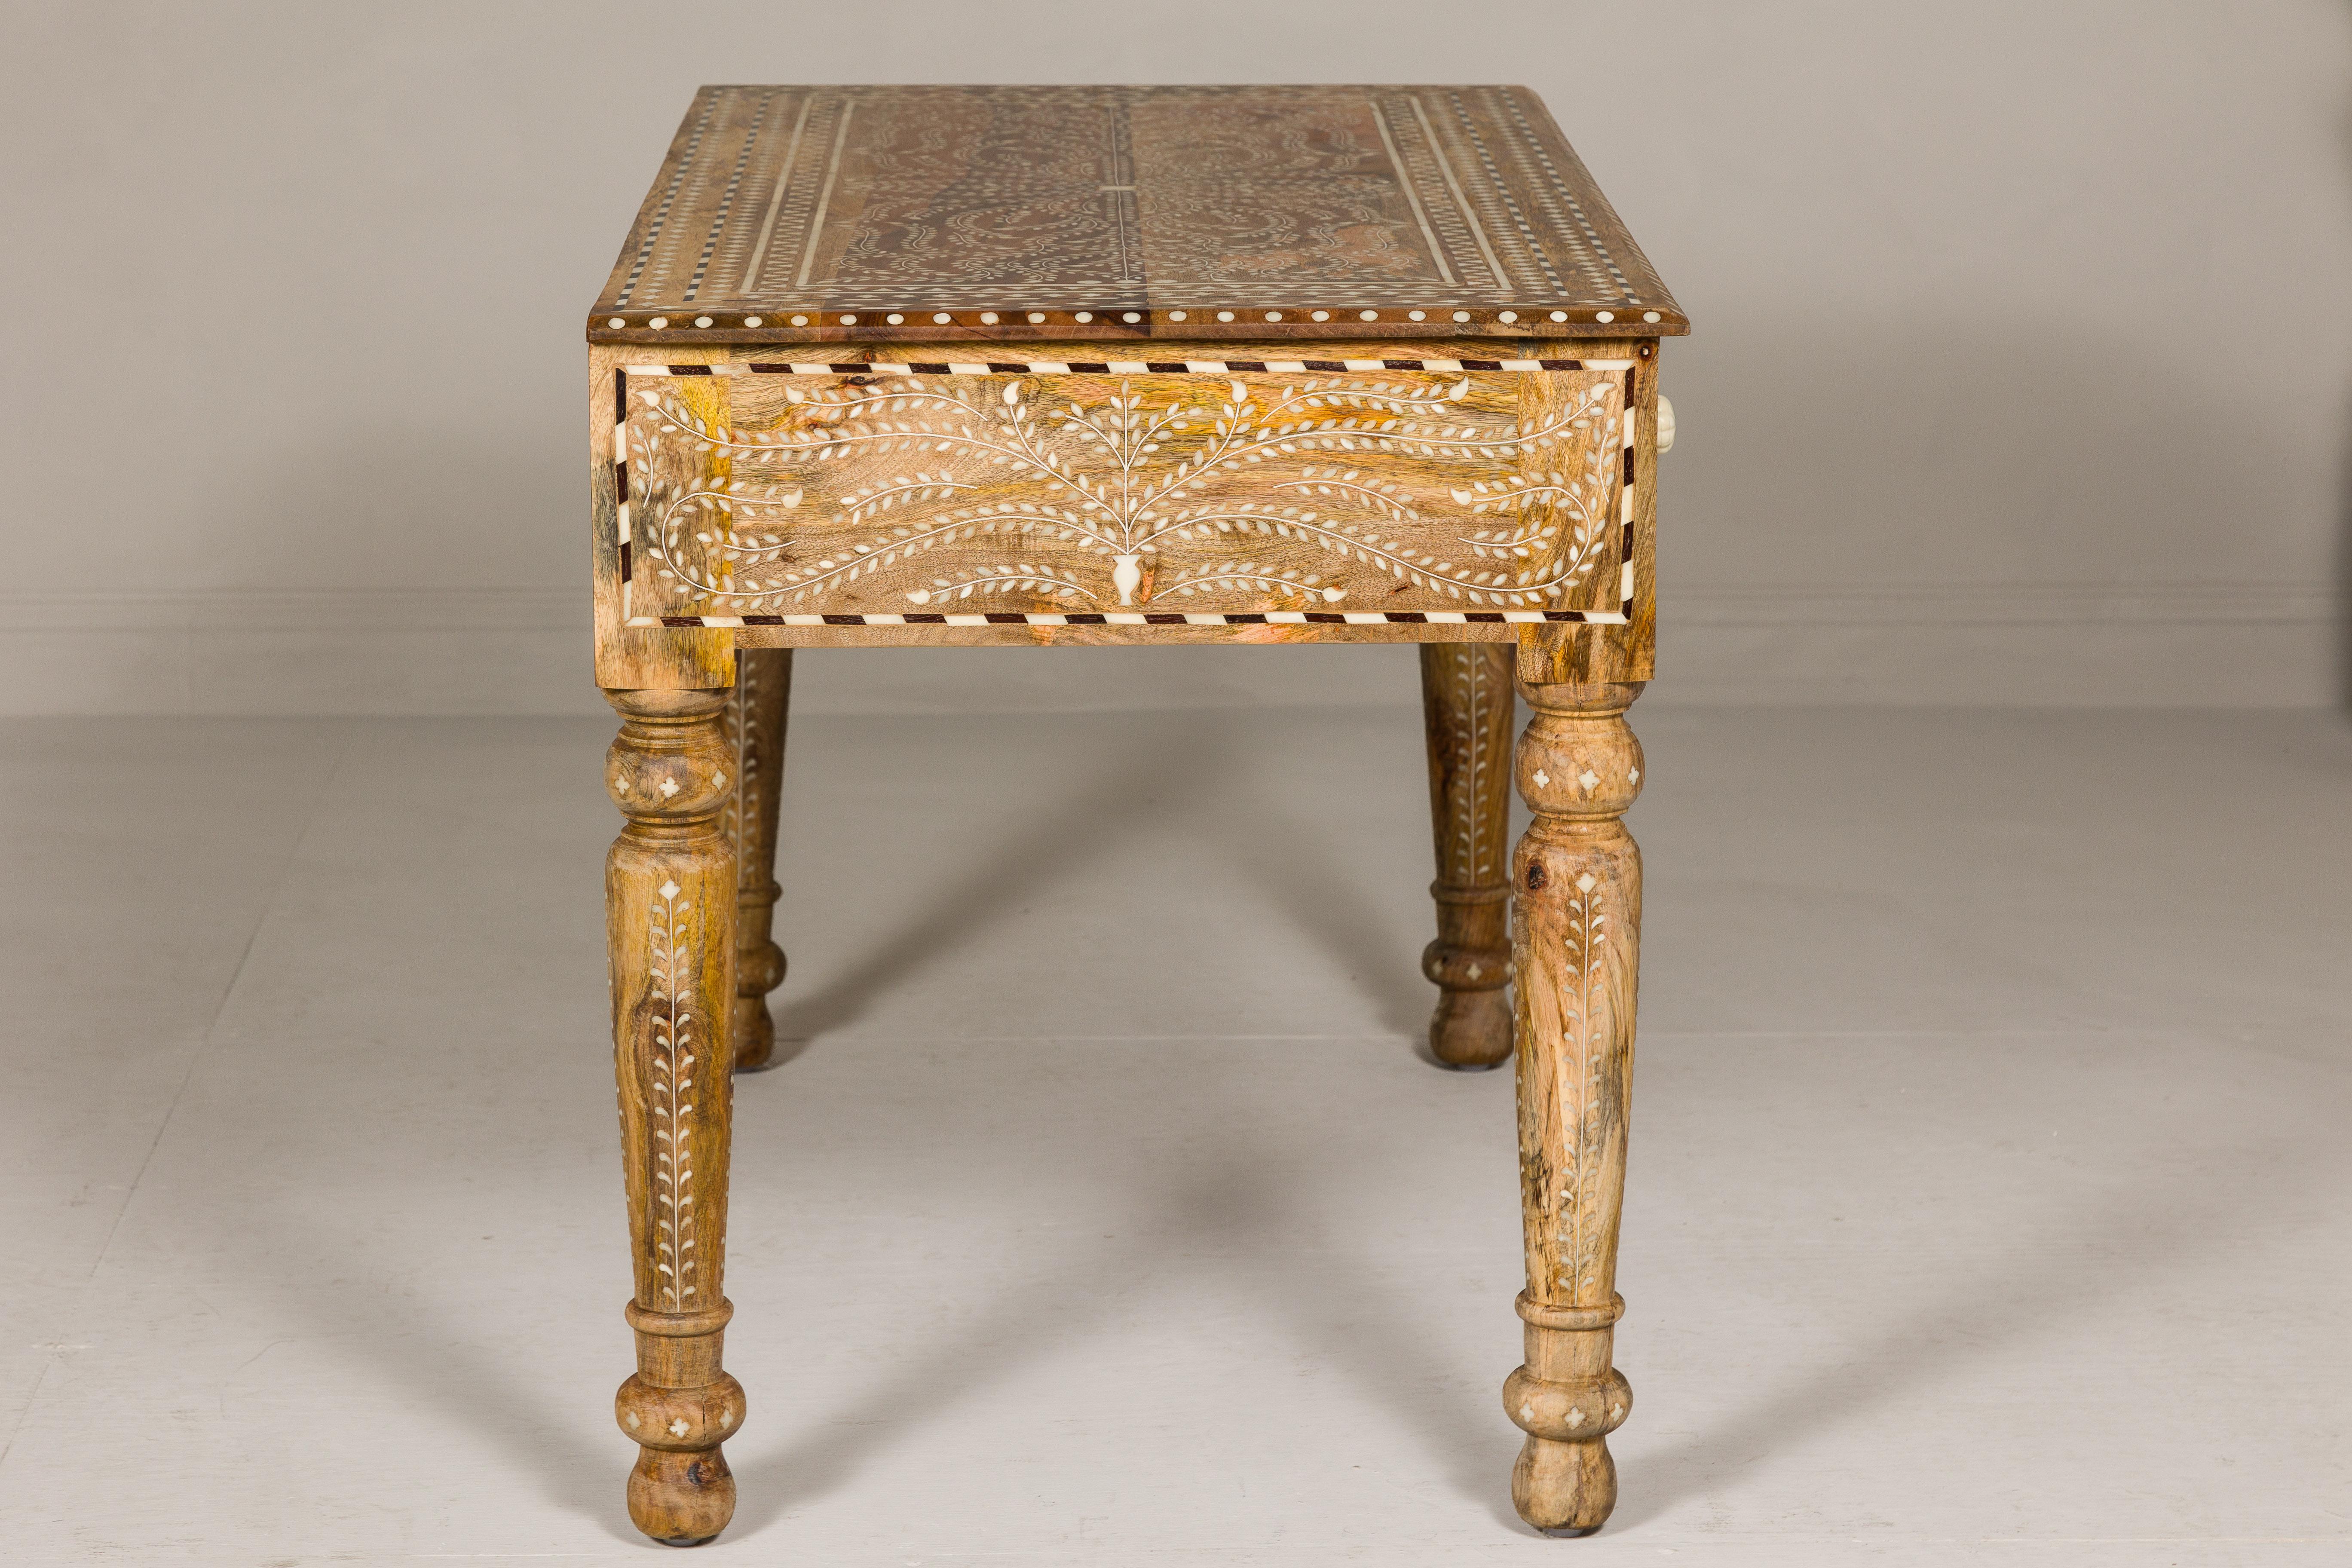 Anglo Indian Style Mango Wood Desk with Drawers, Bone Inlay and Light Patina For Sale 8